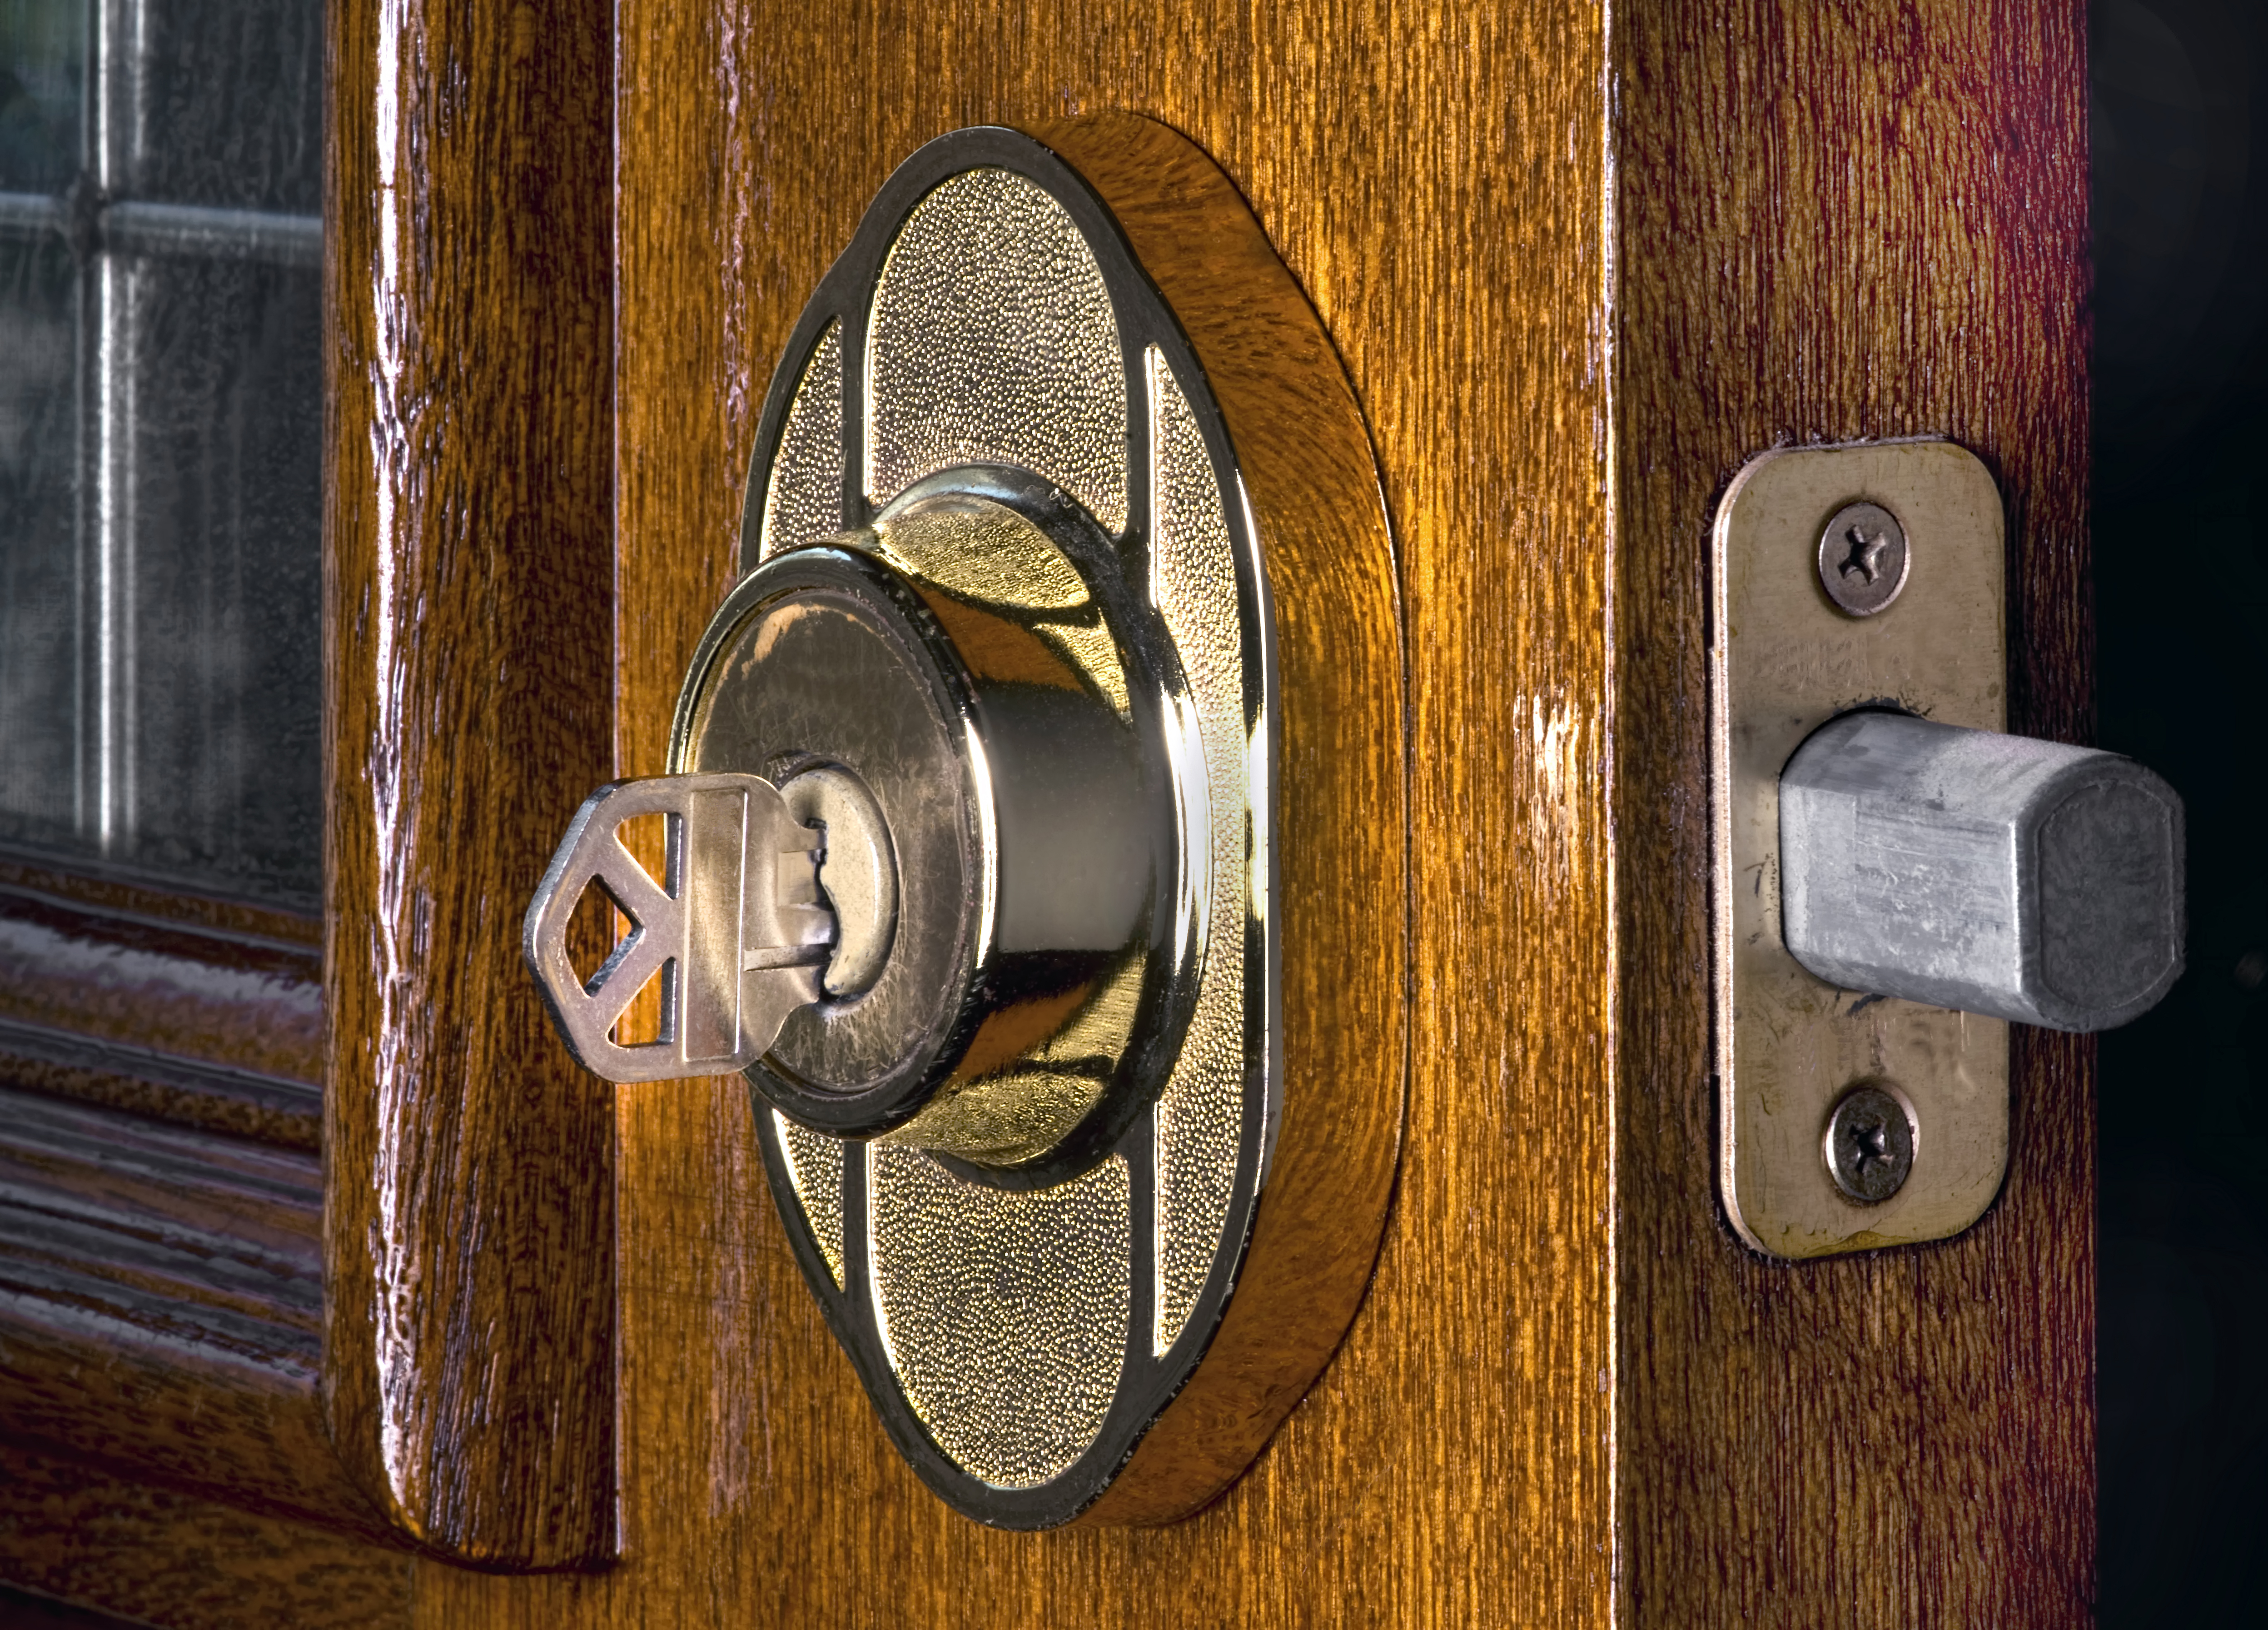 What's your deadbolt made of?